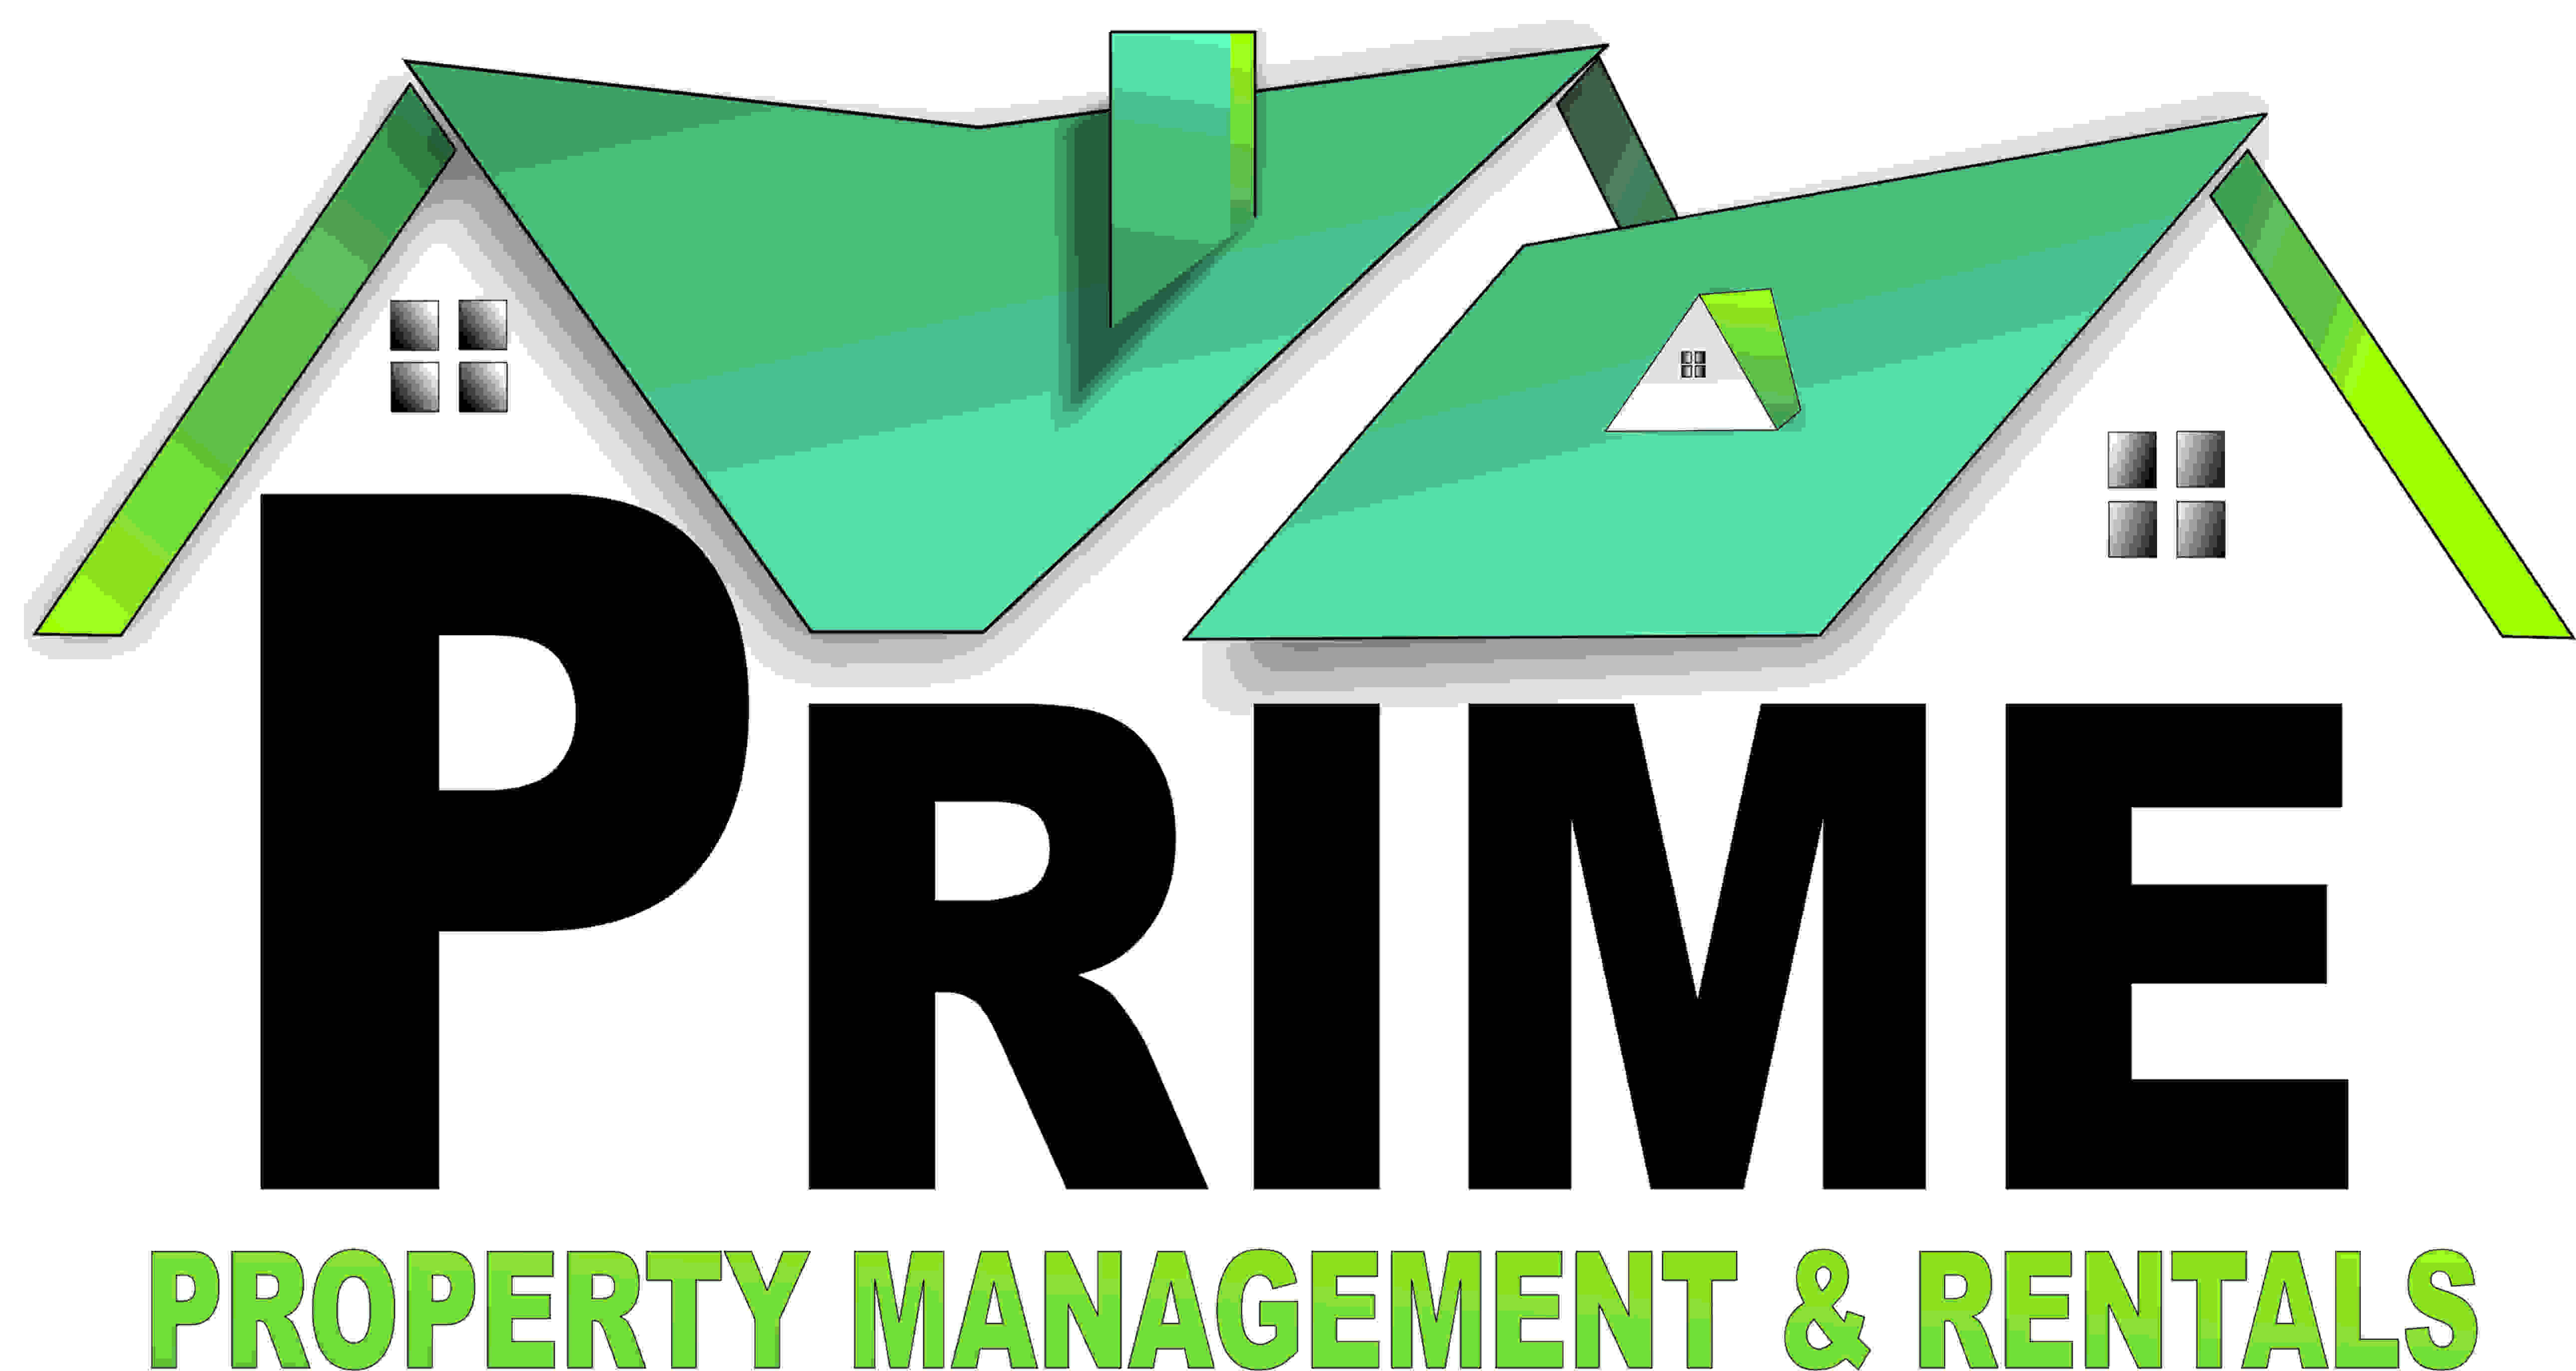 property management companies for rental homes